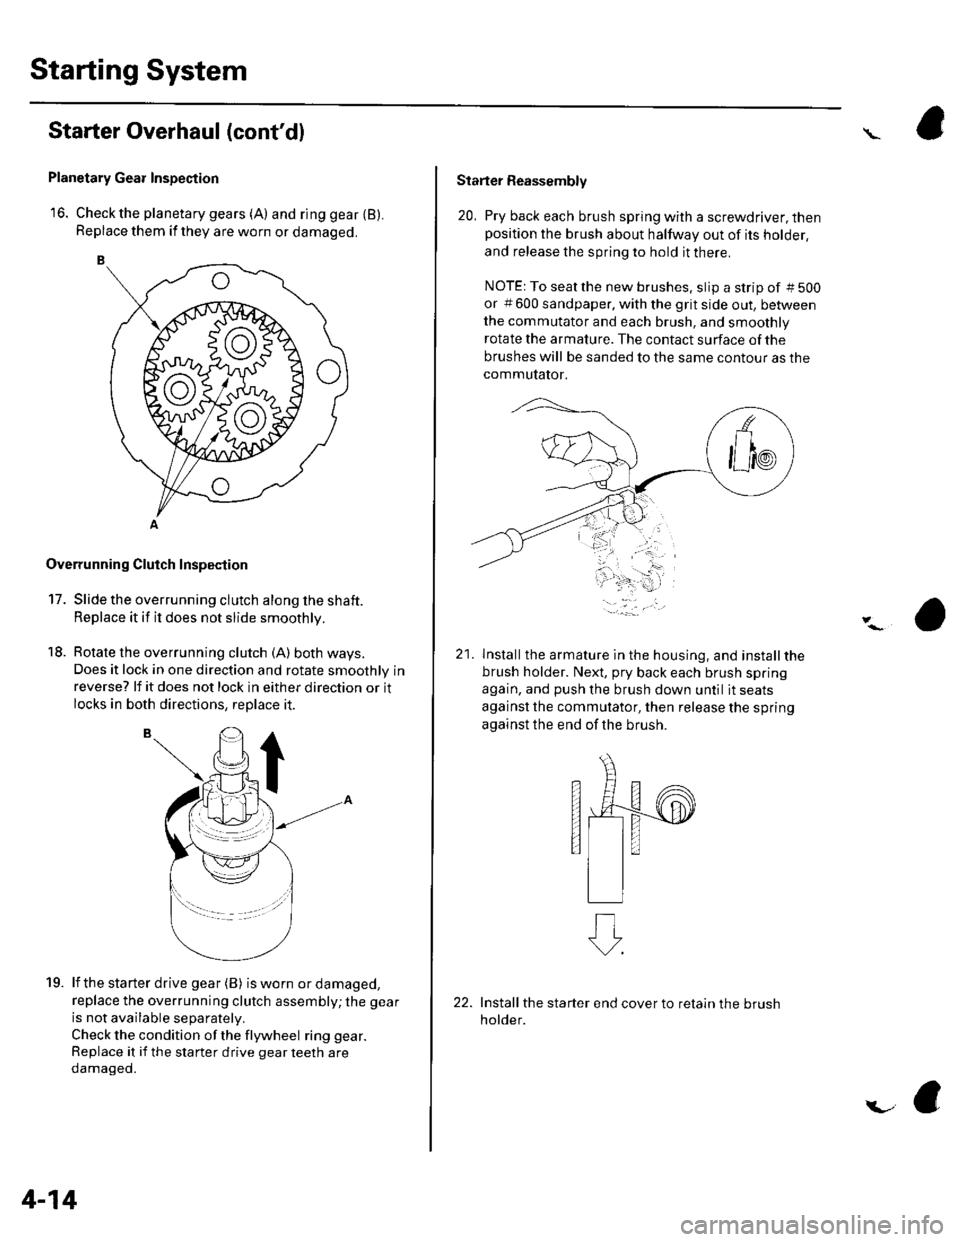 HONDA CIVIC 2003 7.G Service Manual Starting System
Starter Overhaul (contdl
Planetary Gear Inspection
16. Check the planetary gears (A) and ring gear {B).Replace them if they are worn or damaged.
Overrunning Cluich Inspection
17. Slid